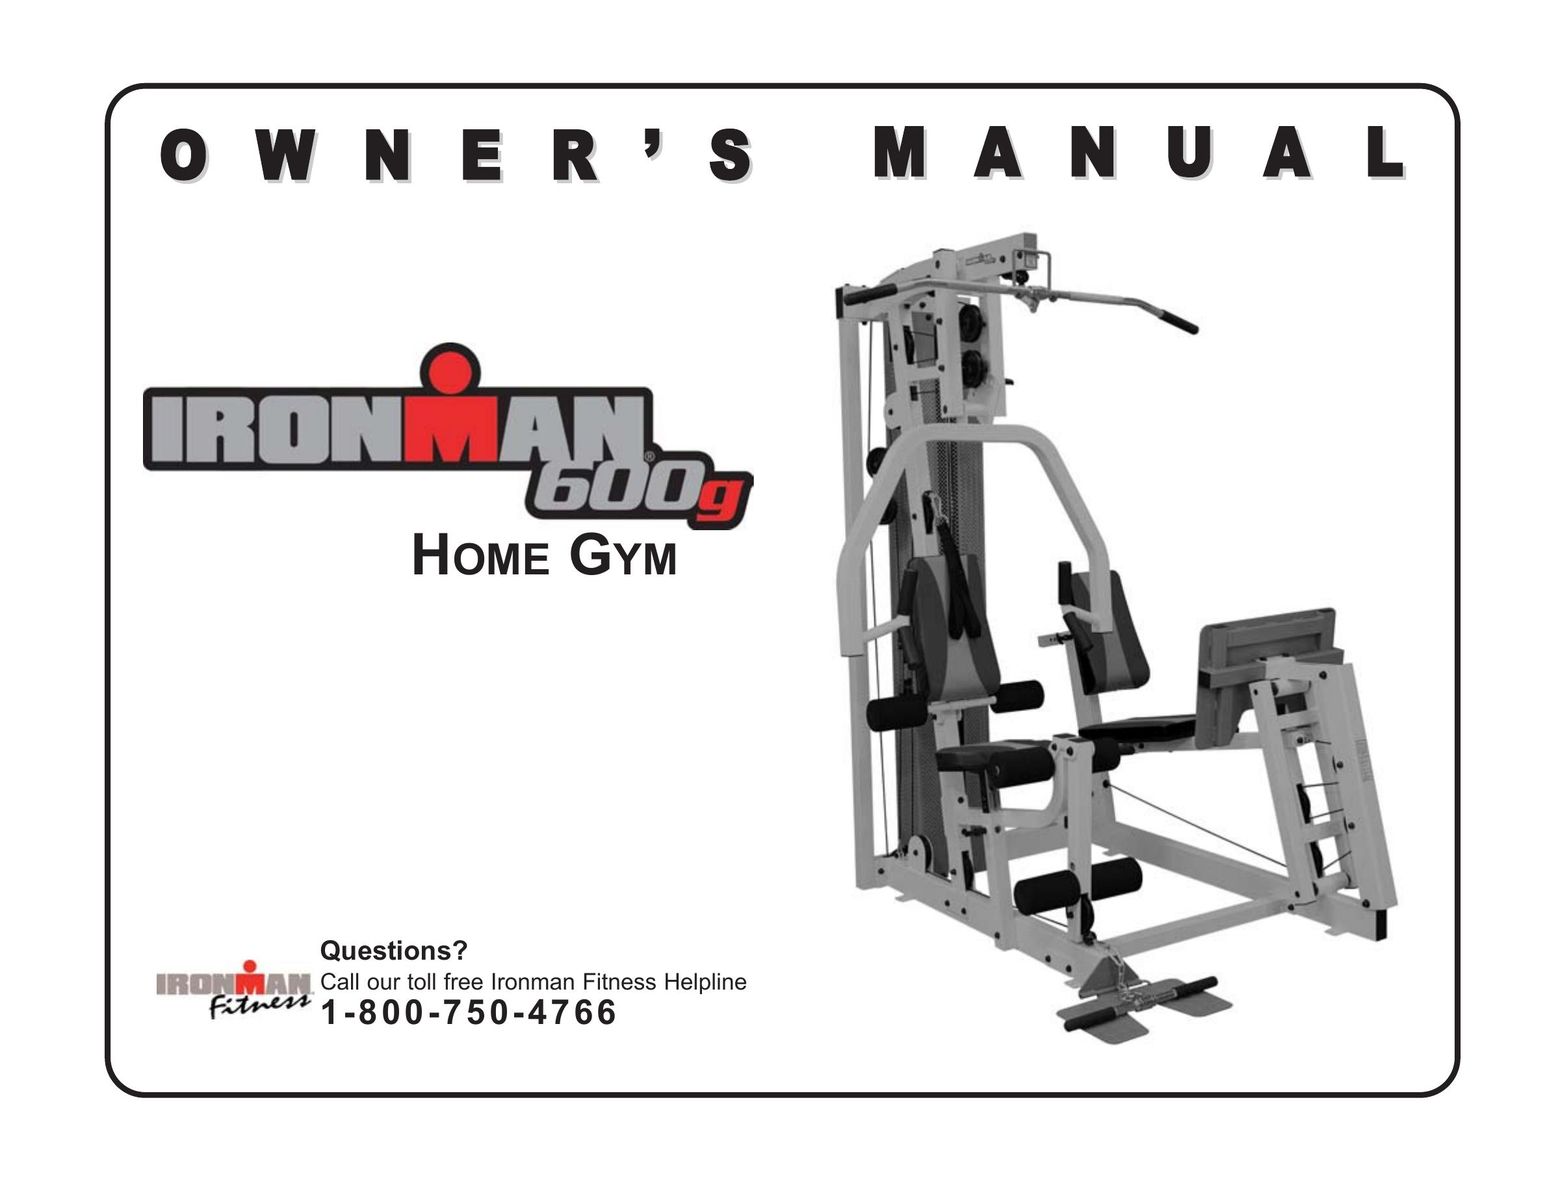 Ironman Fitness 600g Home Gym User Manual